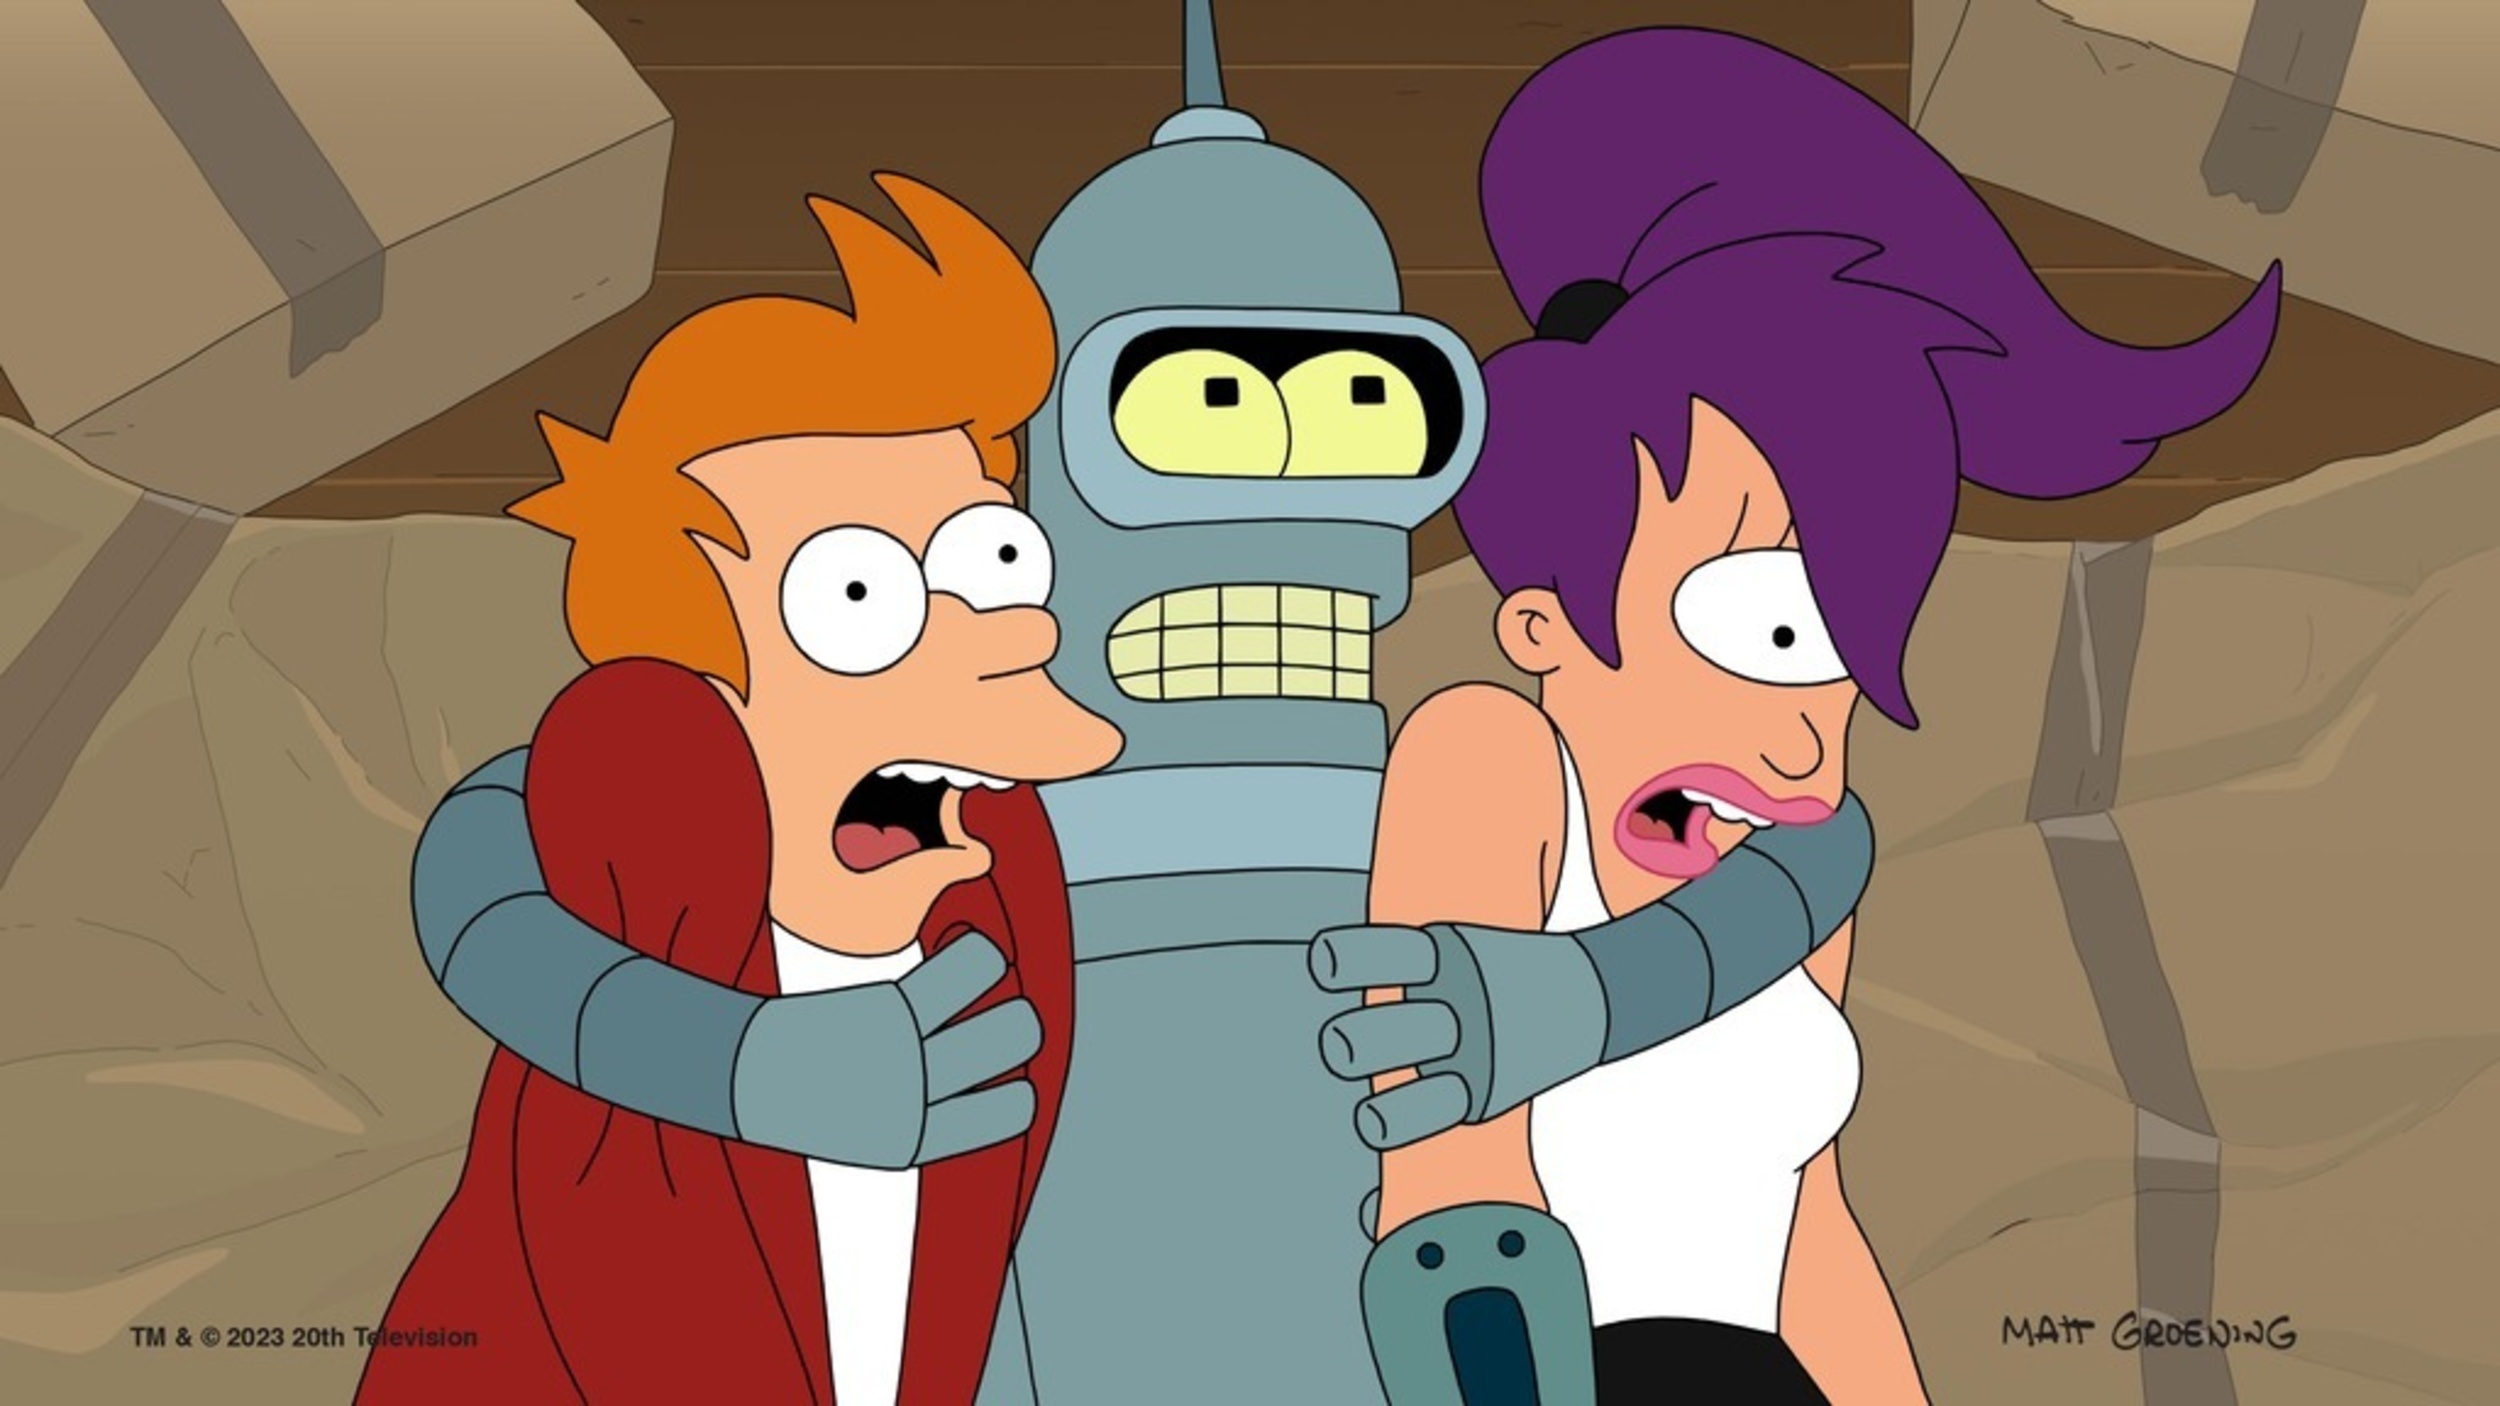 <p><em>Futurama</em> <span>is arguably the series that just won’t quit, having been canceled and revived several times. Despite its reversals of fortune, it has never lost its unique and quirky sense of humor, nor its ability to spoof some of the most common tropes in science fiction. However, the characters allow this show to continue year after year, whether it’s the lovable doofus Fry, the competent and no-nonsense Leela, or the irascible Bender. No matter how many years go by, rejoining these characters and seeing what adventure they will get into next is always a pleasure.</span></p><p>You may also like: <a href='https://www.yardbarker.com/entertainment/articles/the_essential_woodstock_playlist_020424/s1__37634261'>The essential Woodstock playlist</a></p>